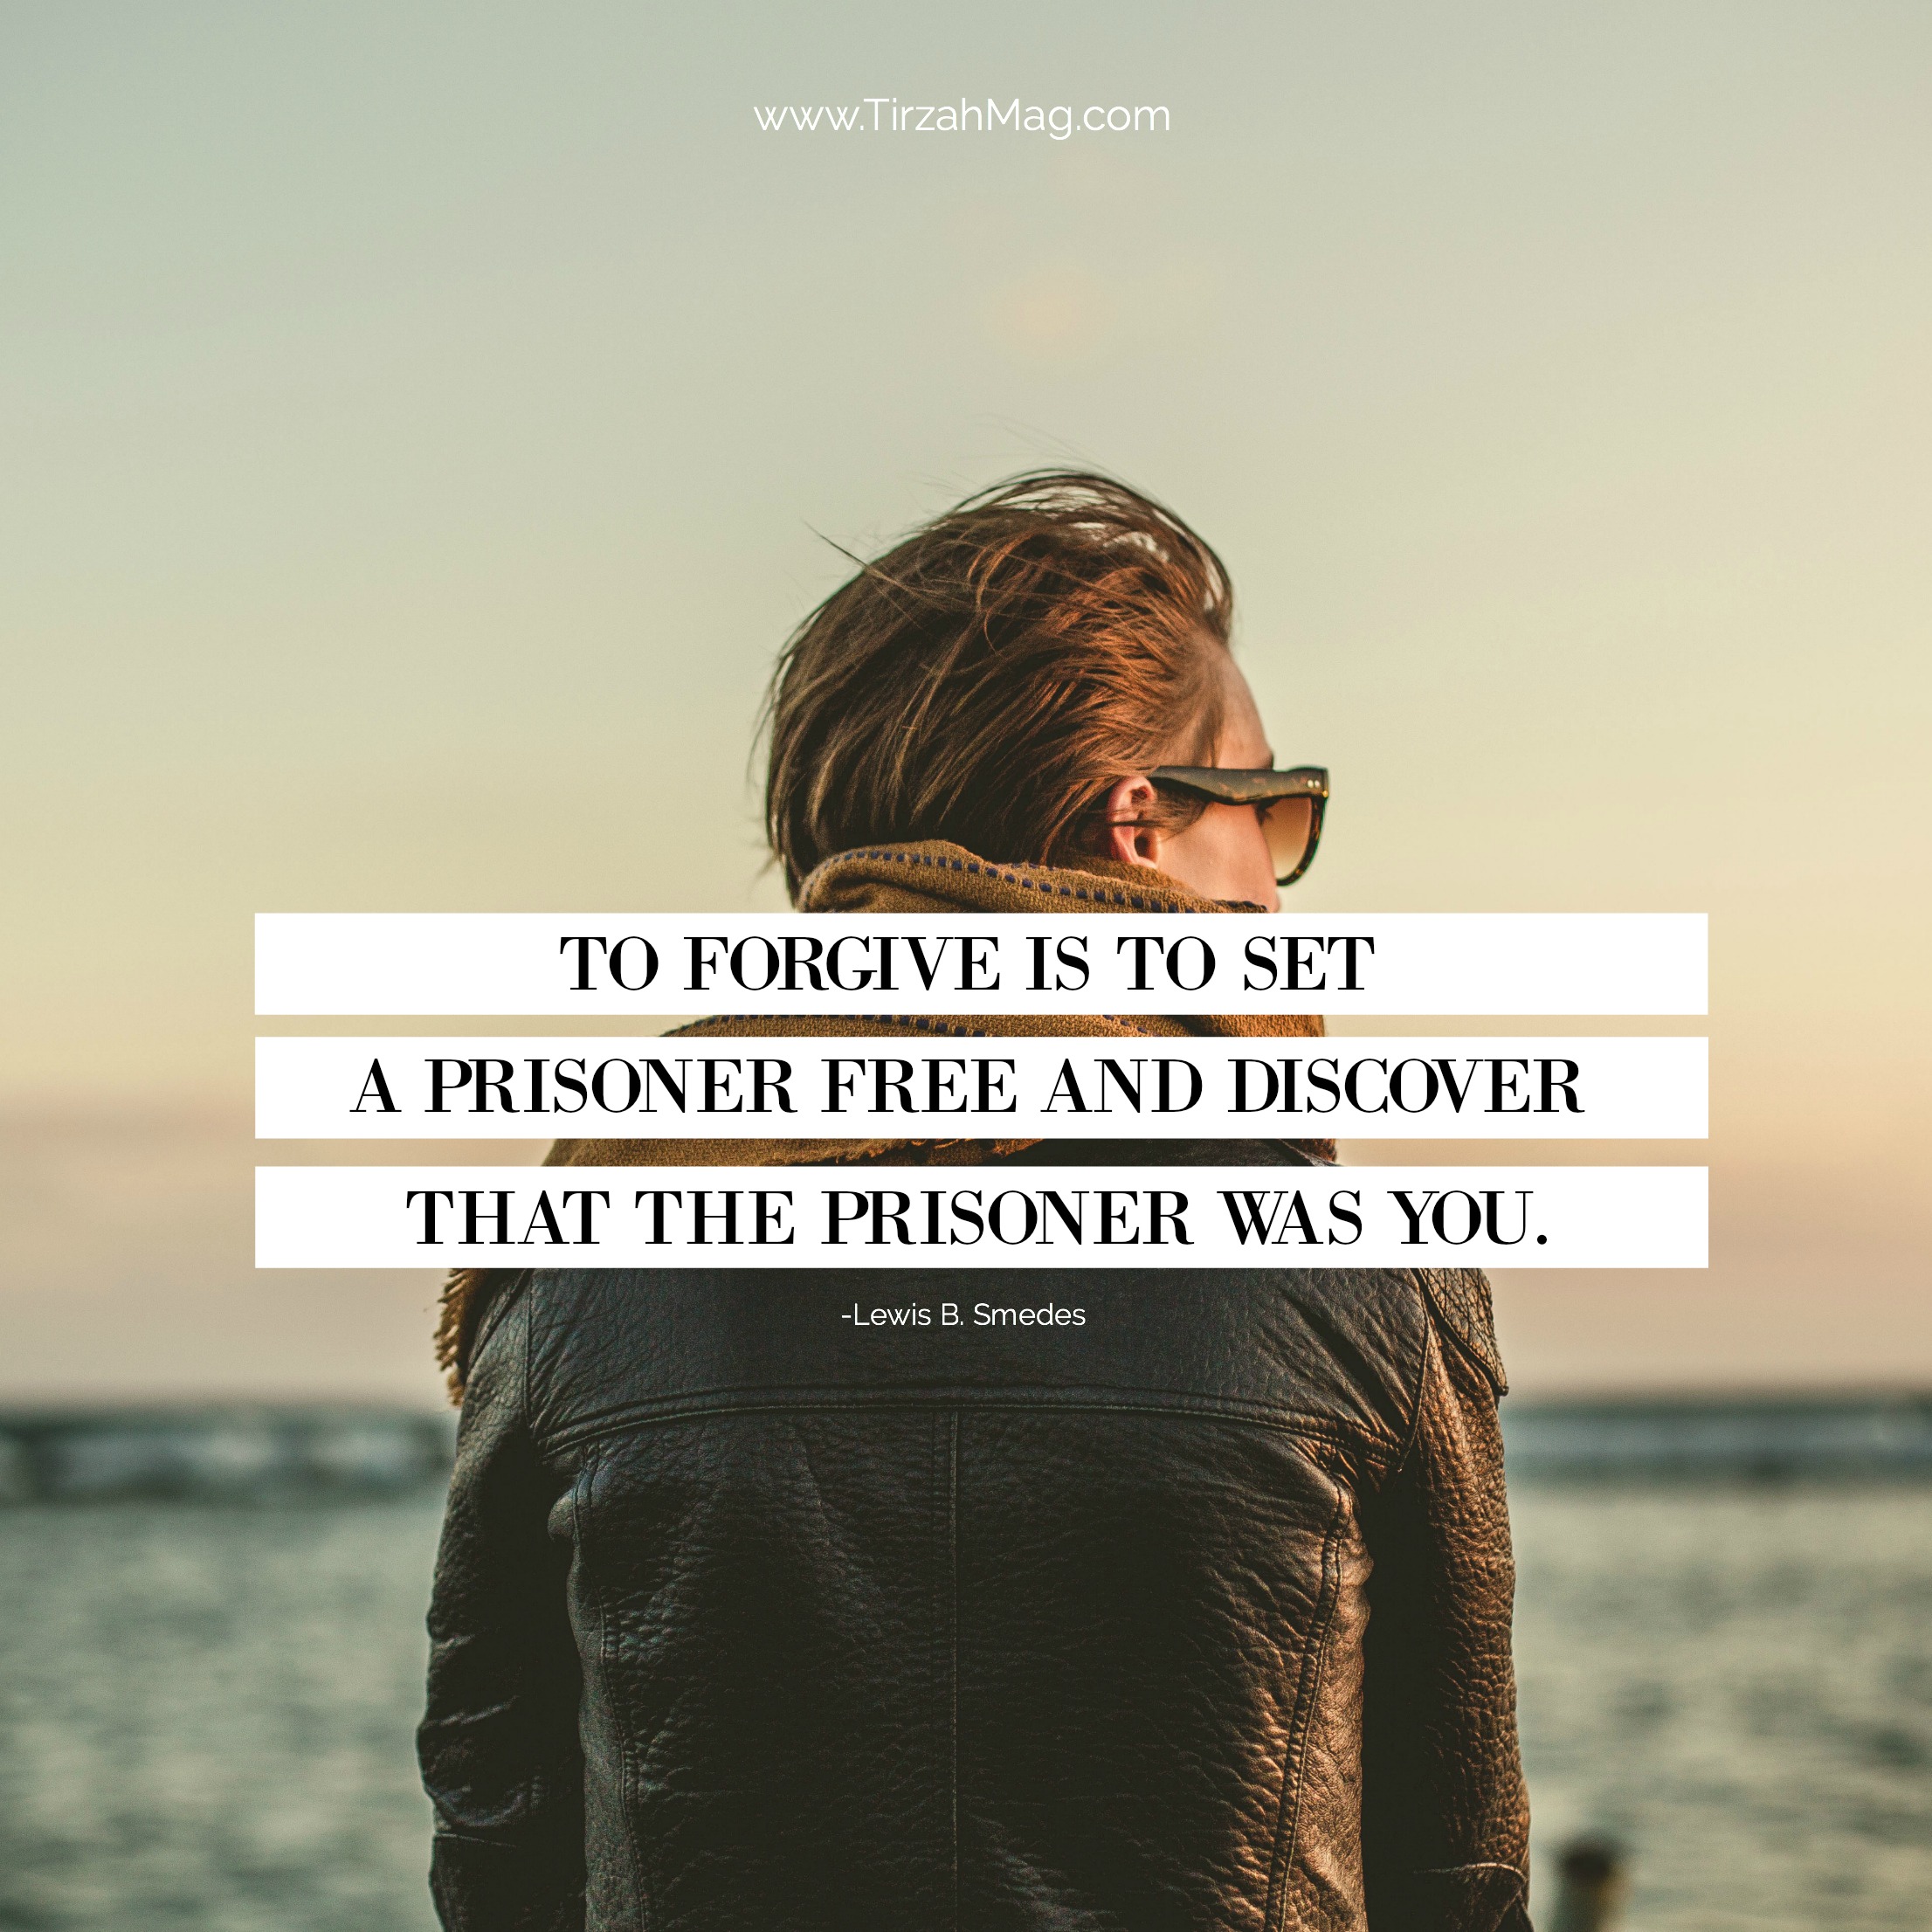 Finding freedom in forgiveness